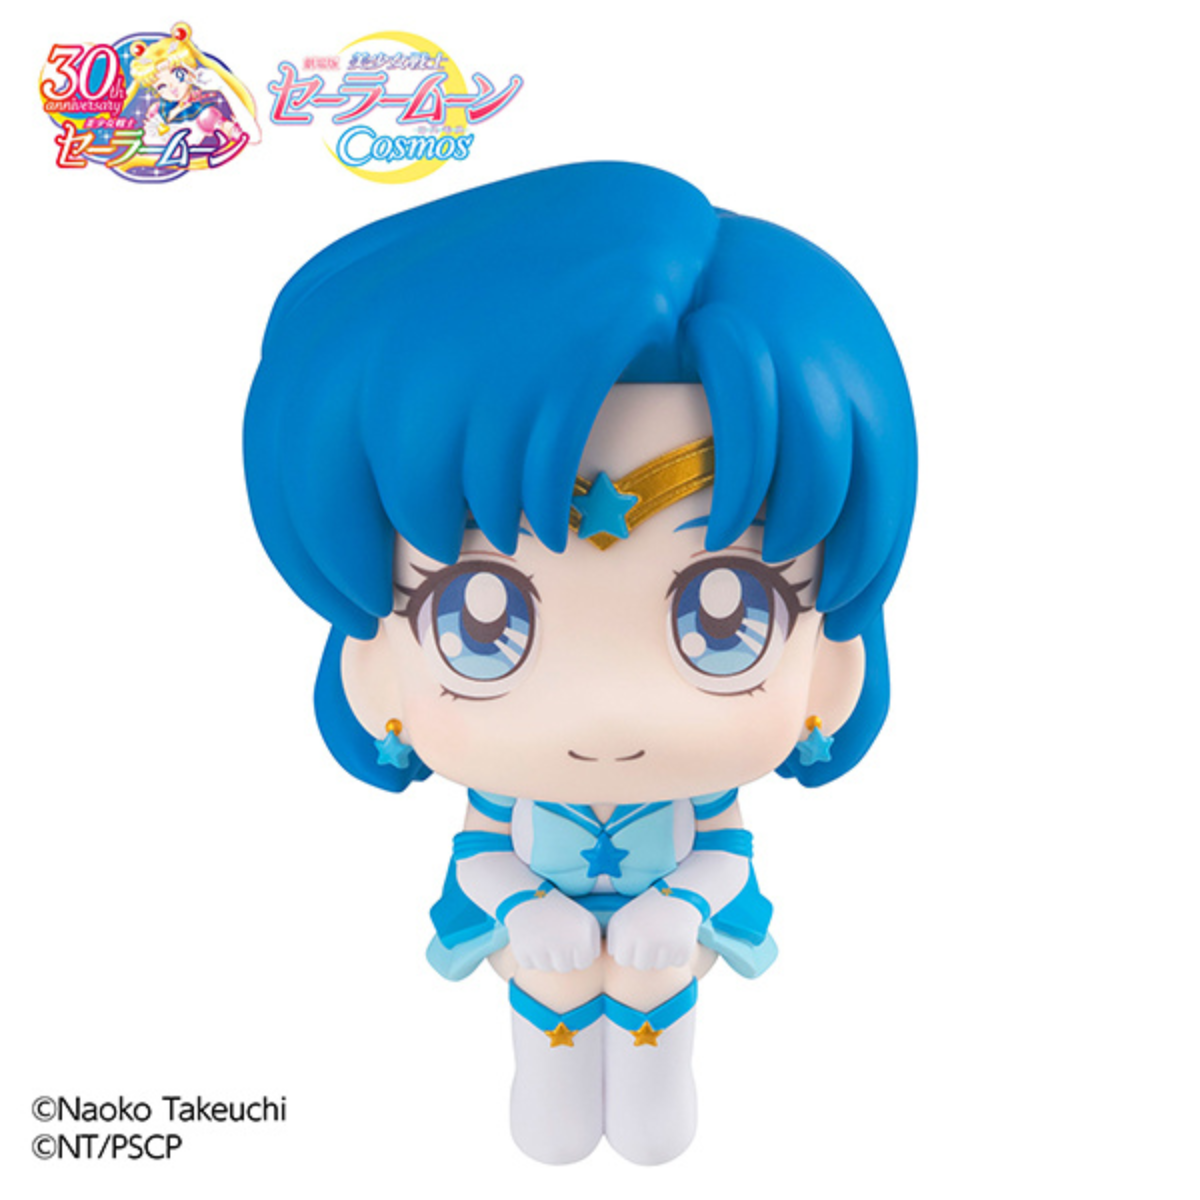 Sailor Moon Look Up Series "Eternal Sailor Mercury" (Cosmos The Movie Ver.)-MegaHouse-Ace Cards & Collectibles